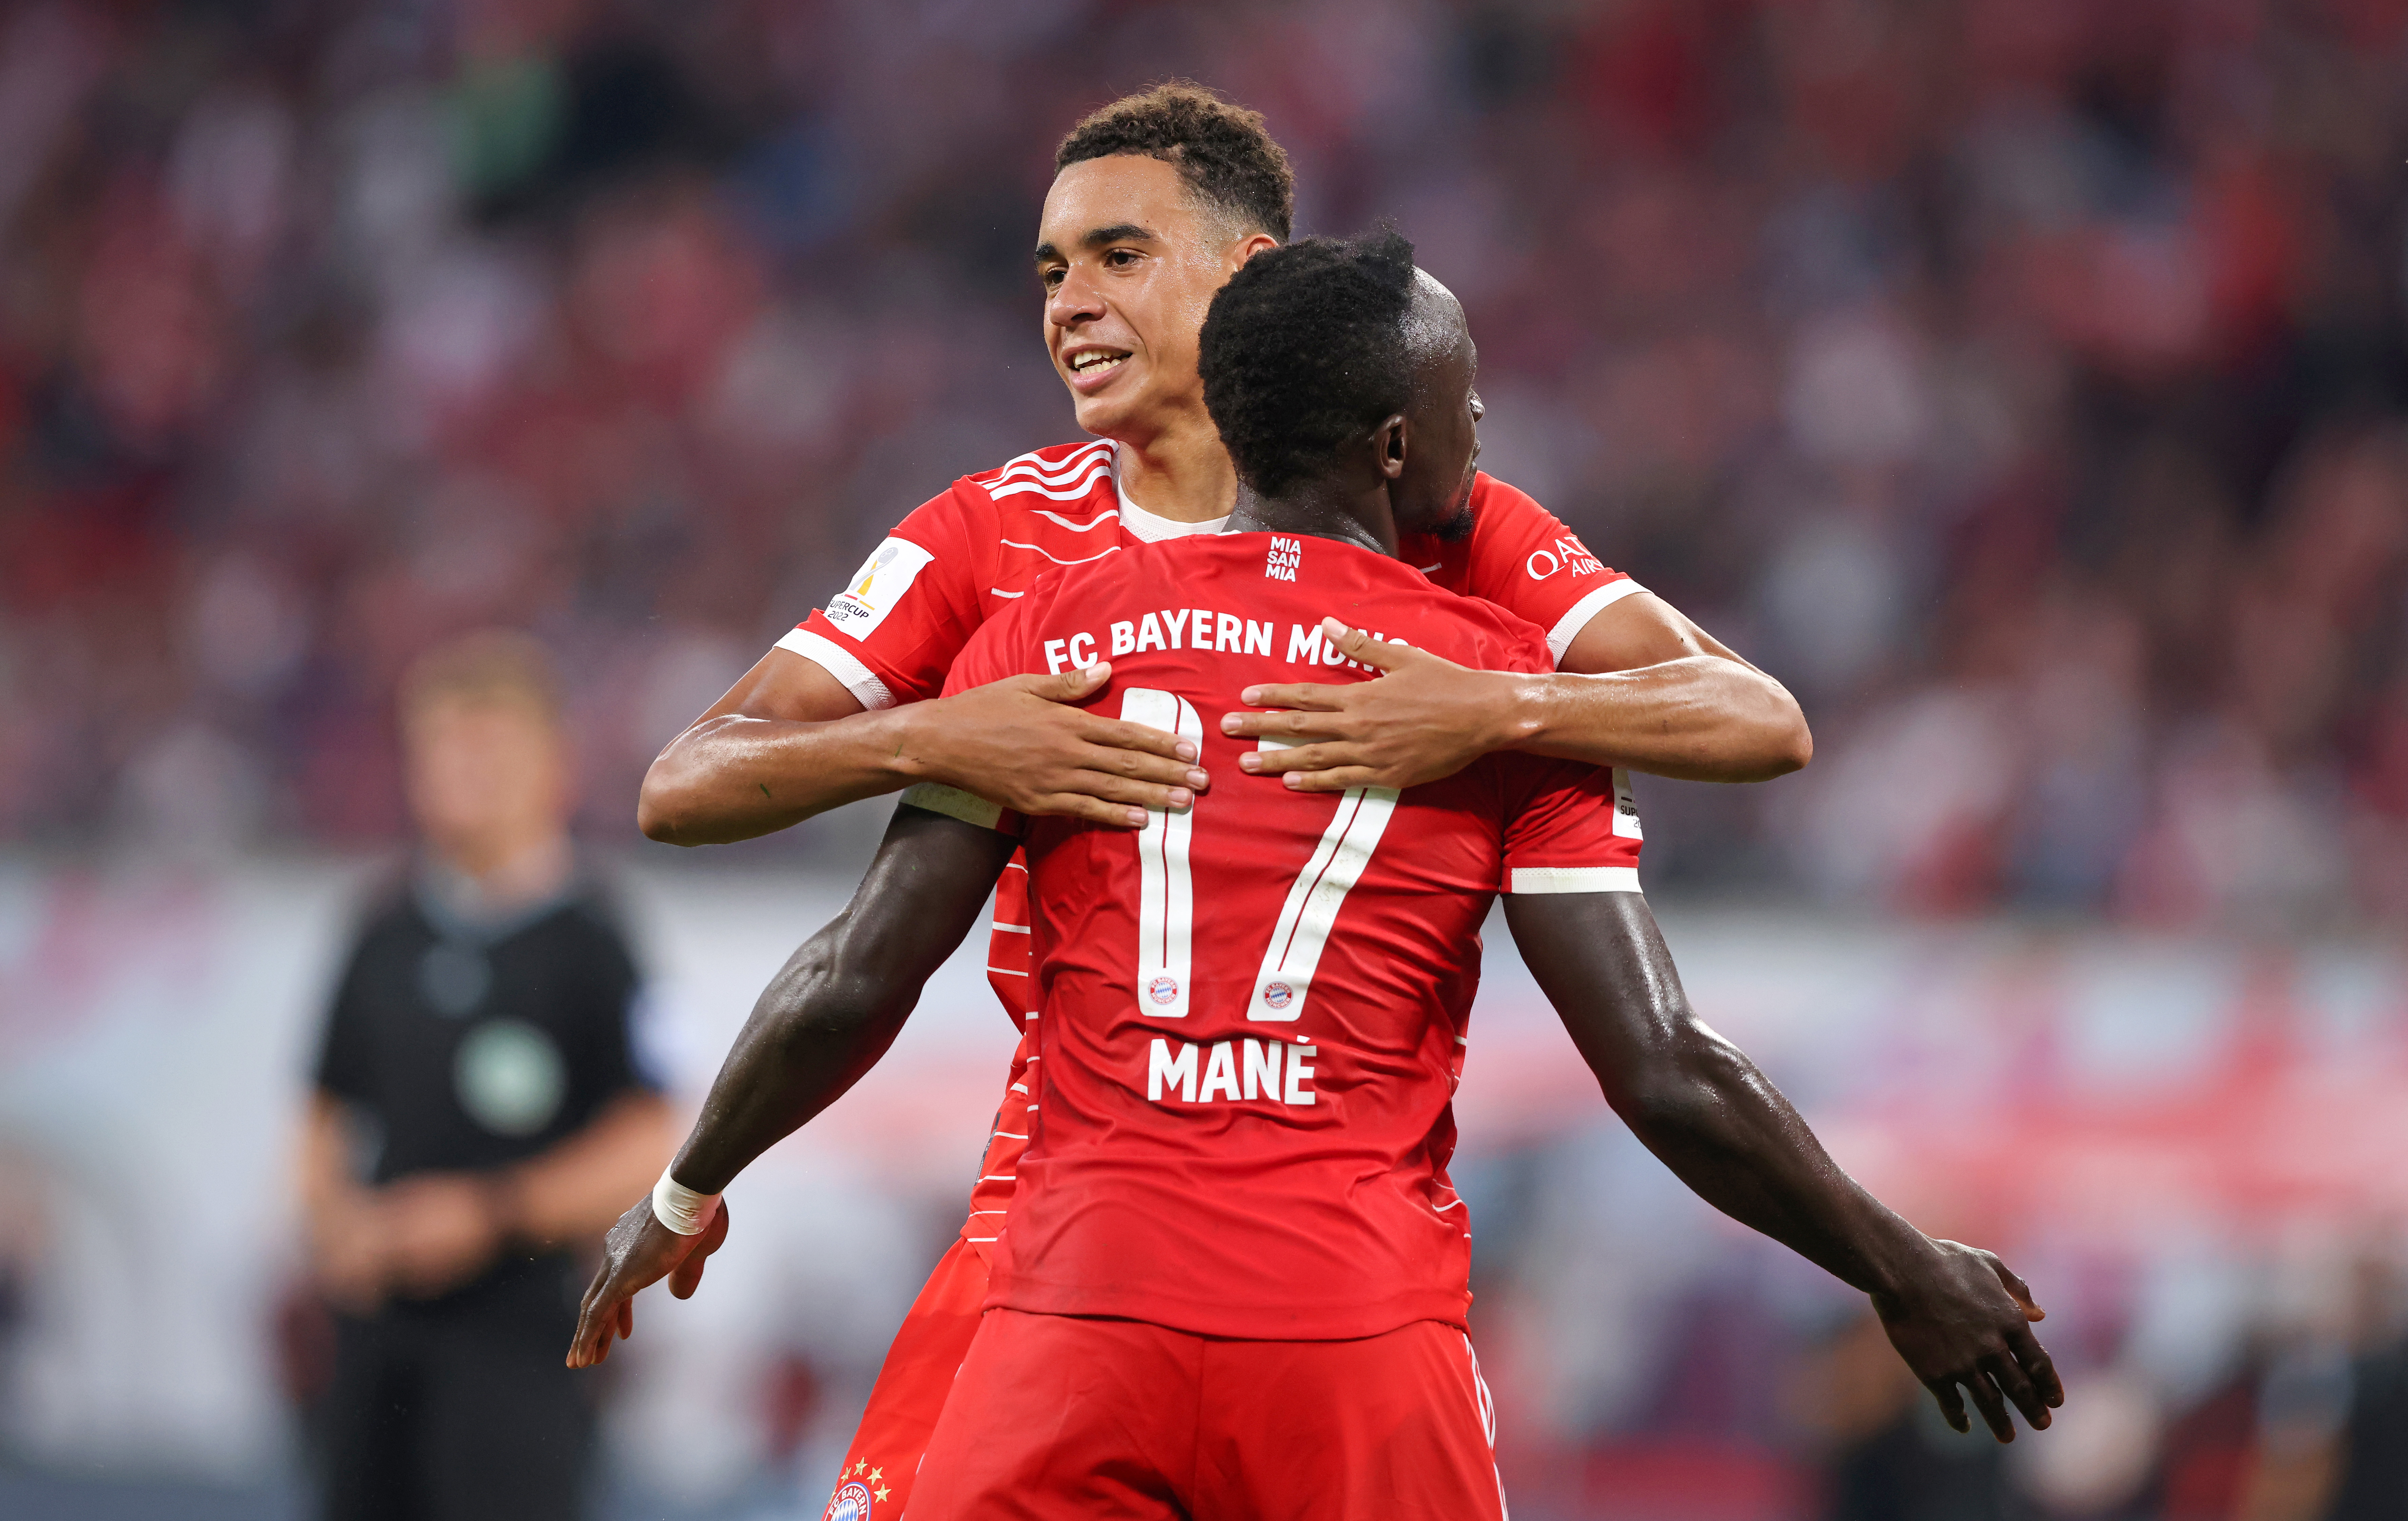 Jamal Musiala leaps to embrace Sadio Mané after a goal against RB Leipzig in the DFL-Supercup. 